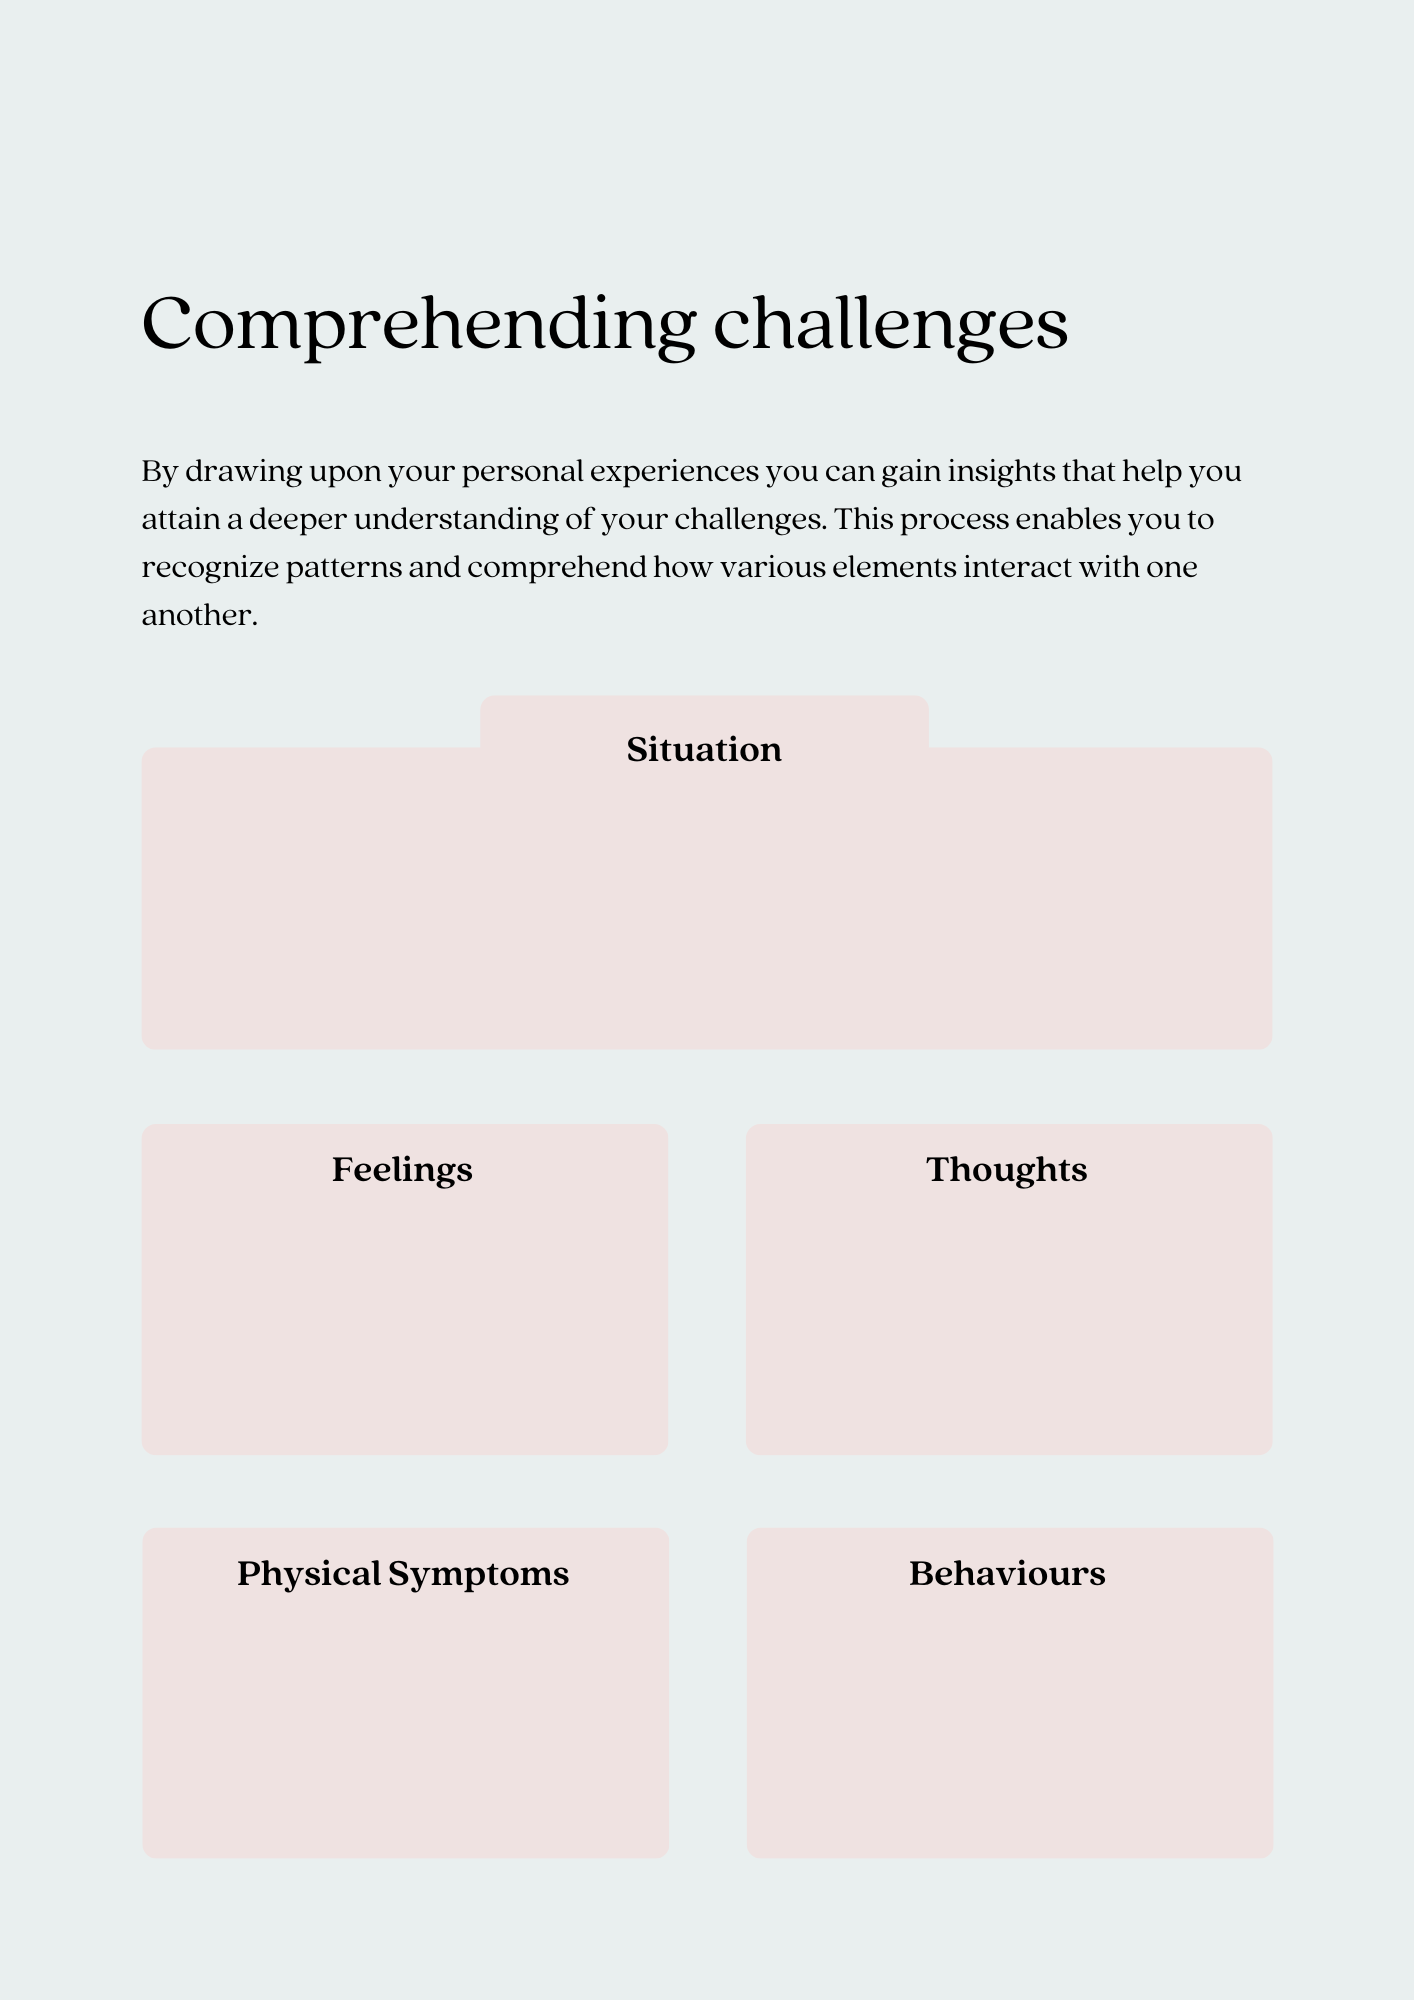 UNLEASHING RESILIENCE WORKBOOK " Mastering Stress & Challenging Negative Thoughts"